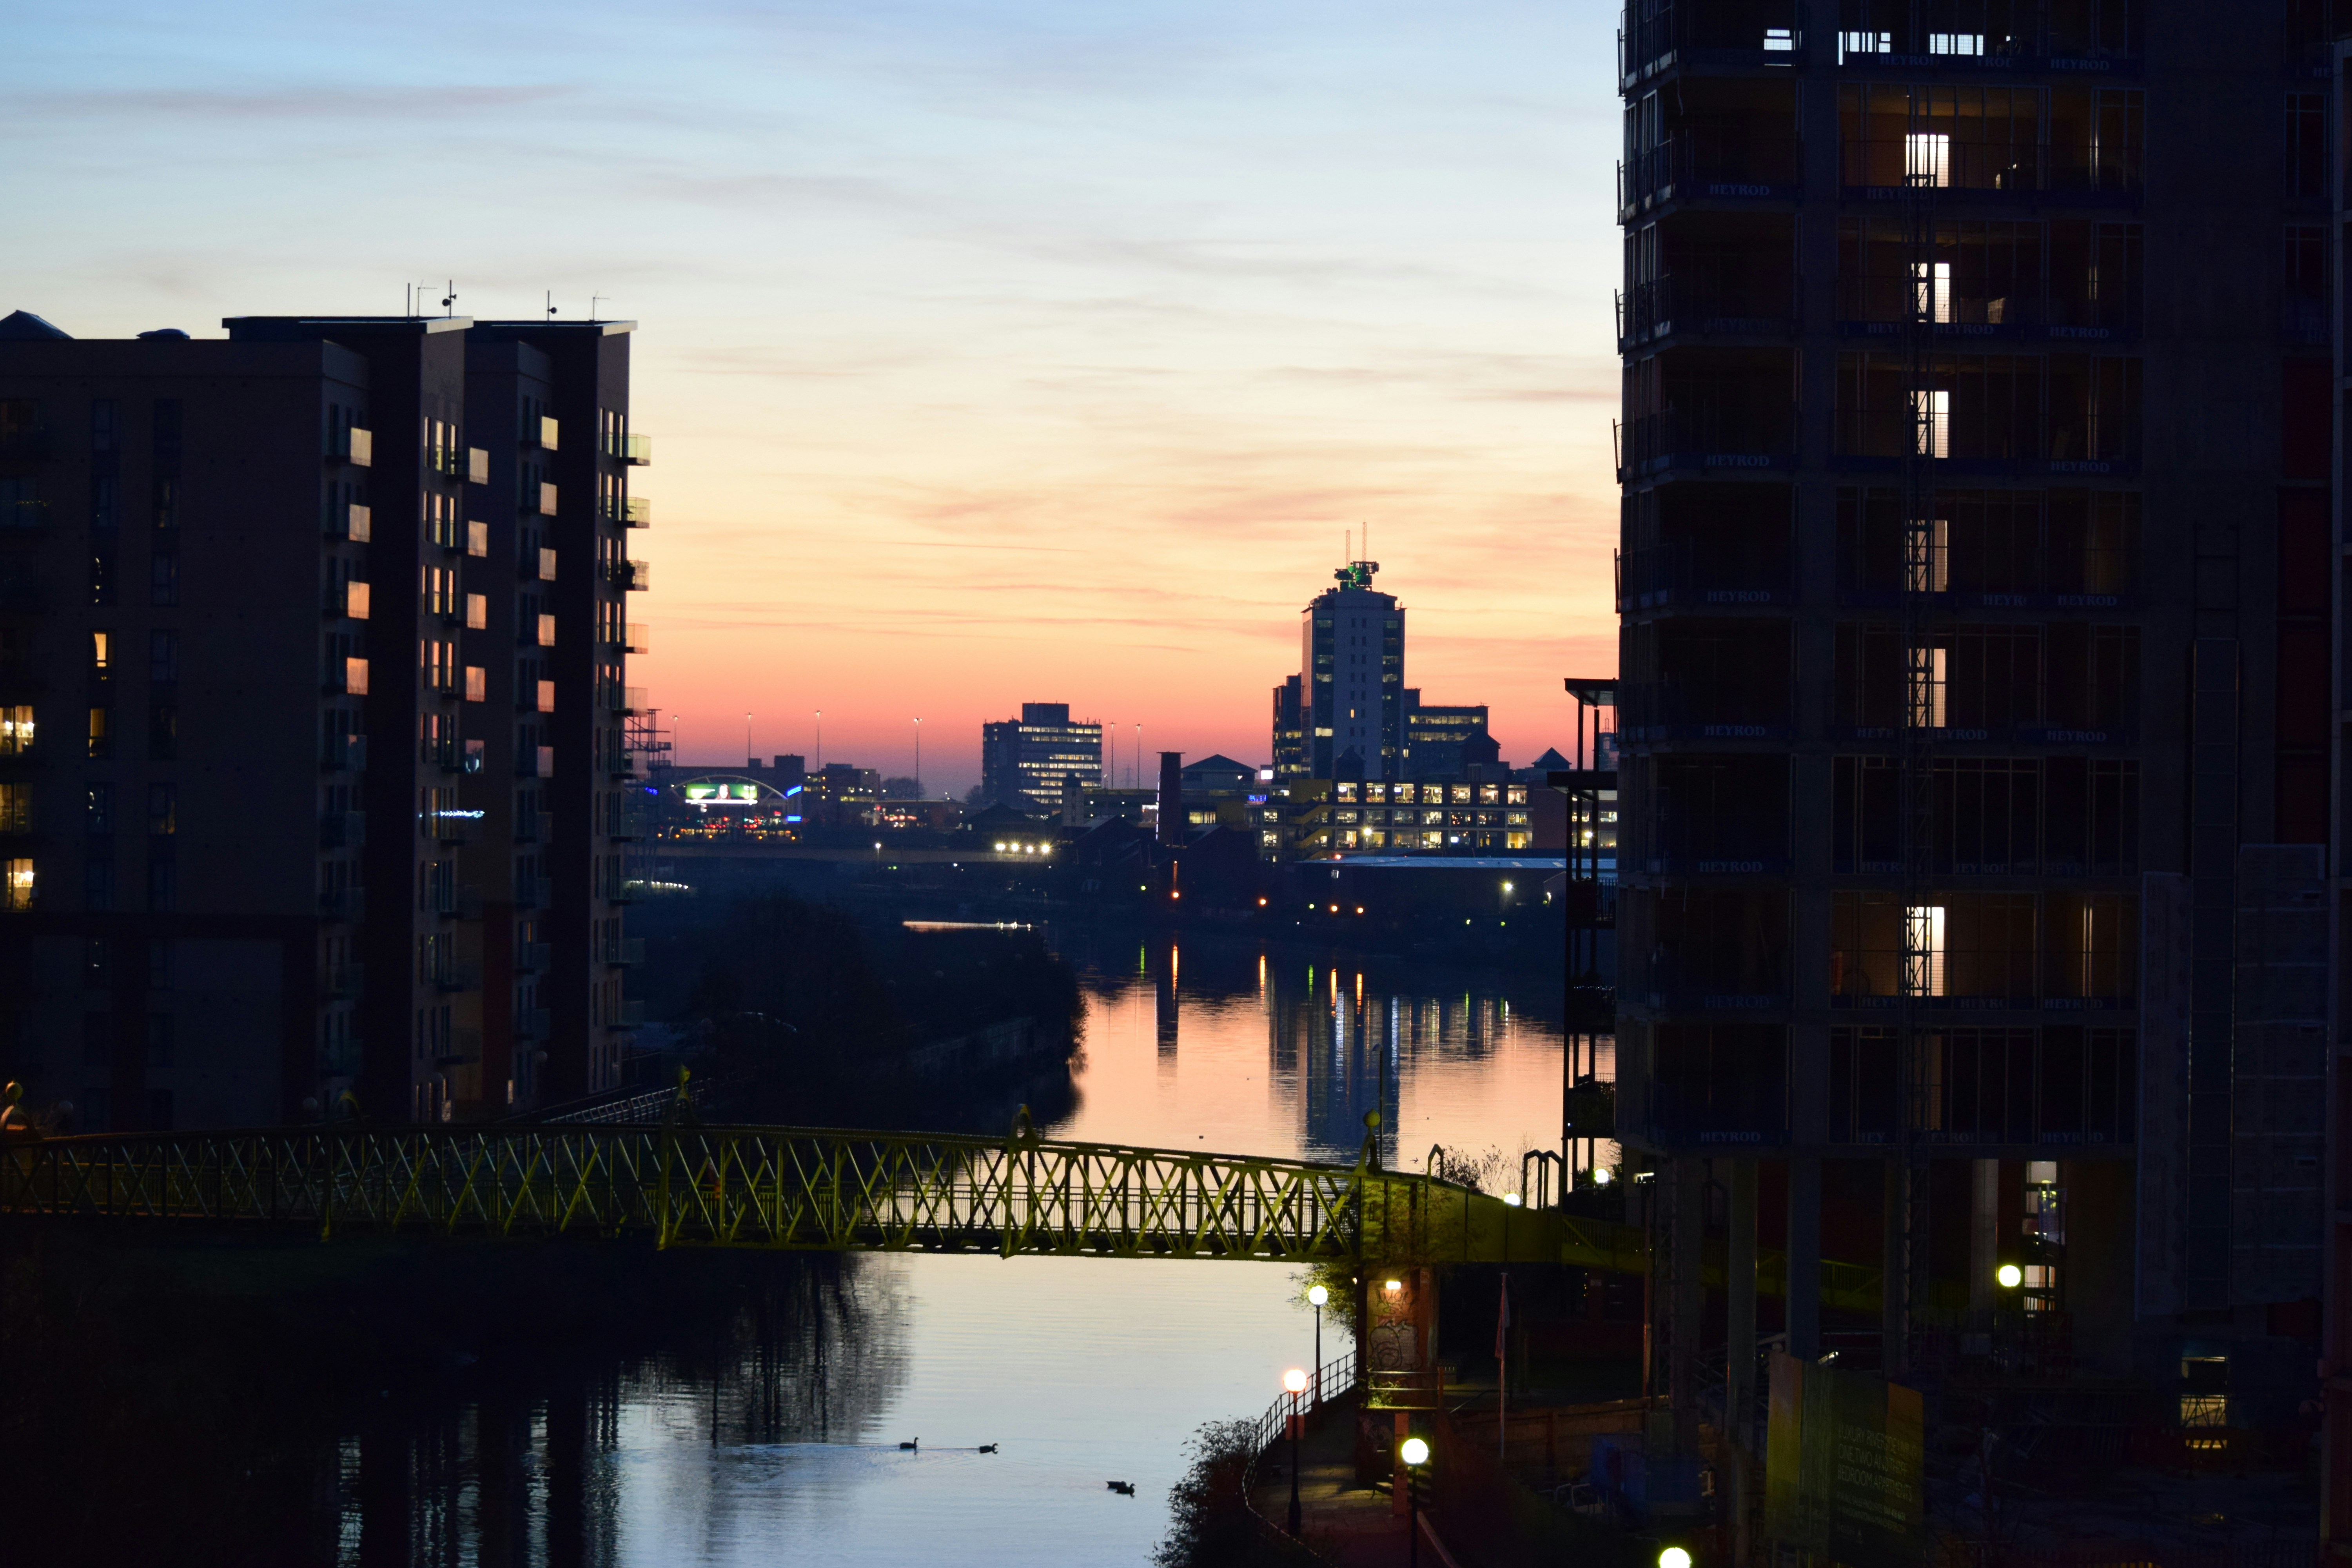 The River Irwell at sunset